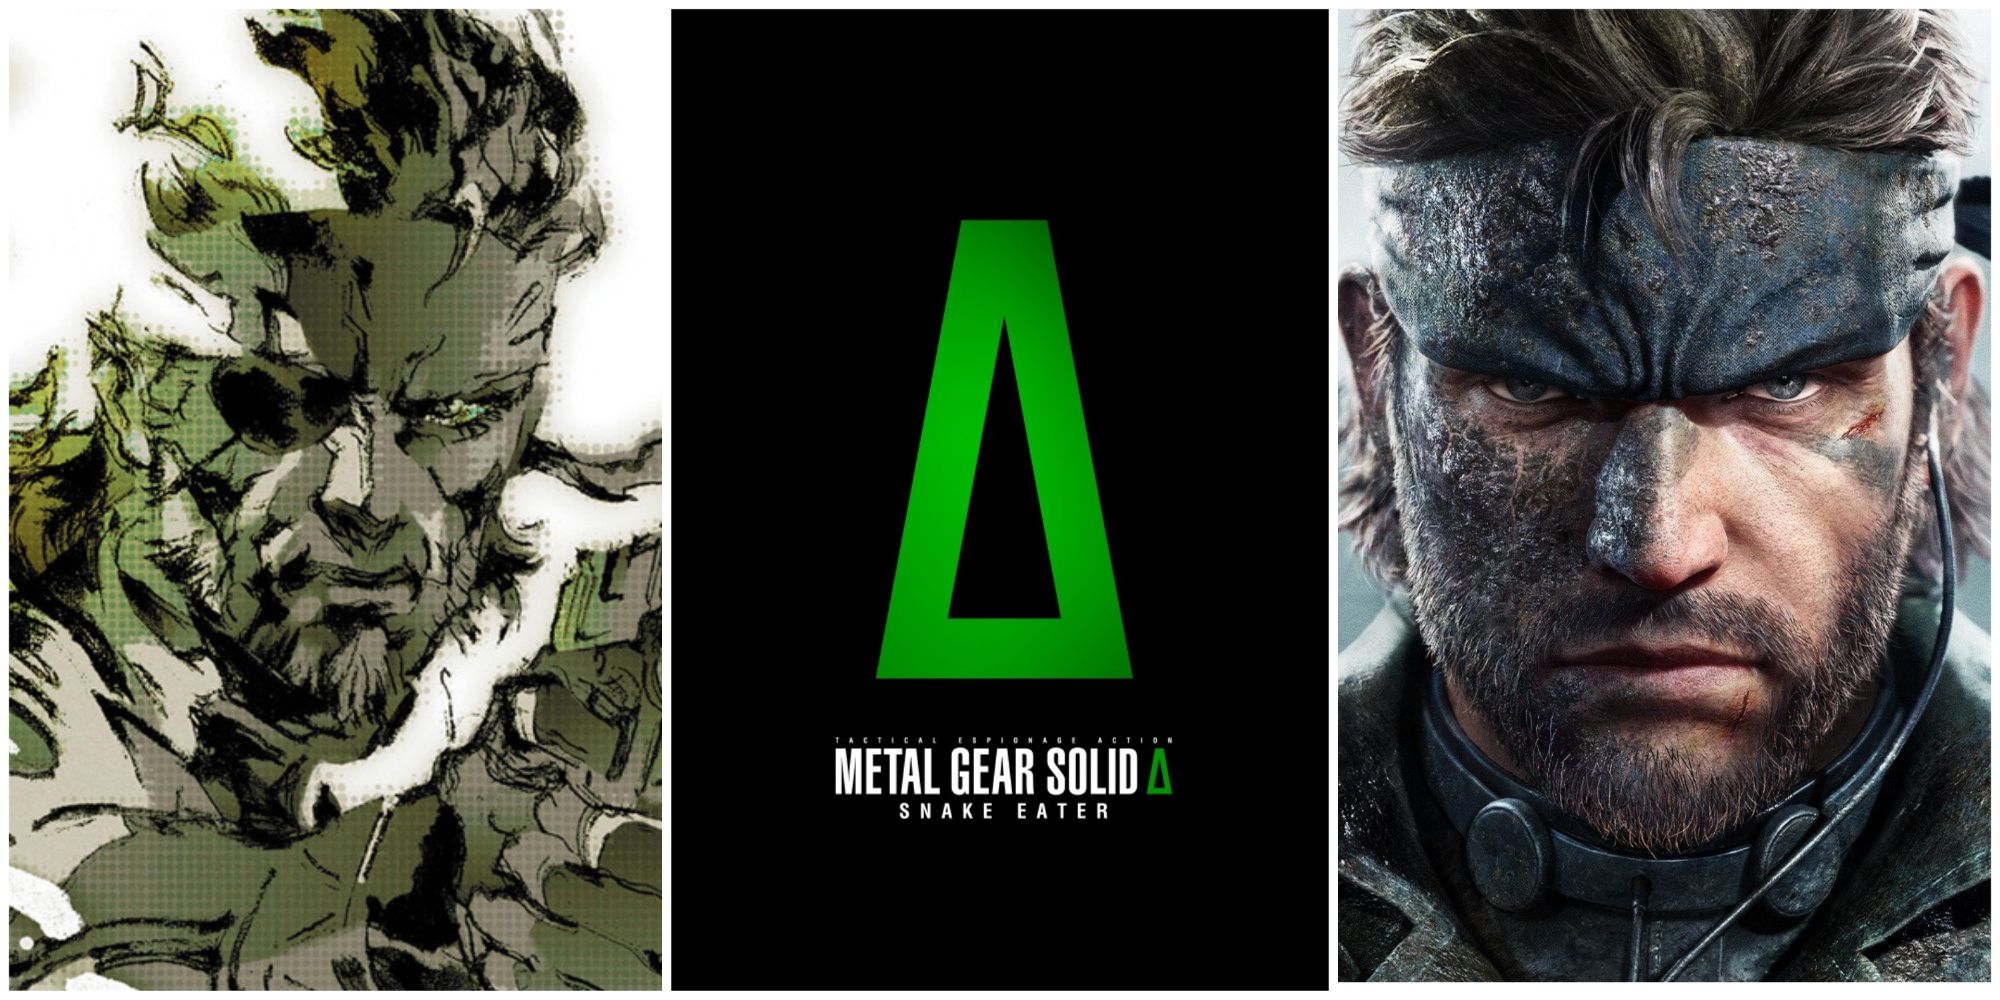 Metal Gear Solid Delta: Snake Eater First In-Engine Look Revealed -  PlayStation Universe